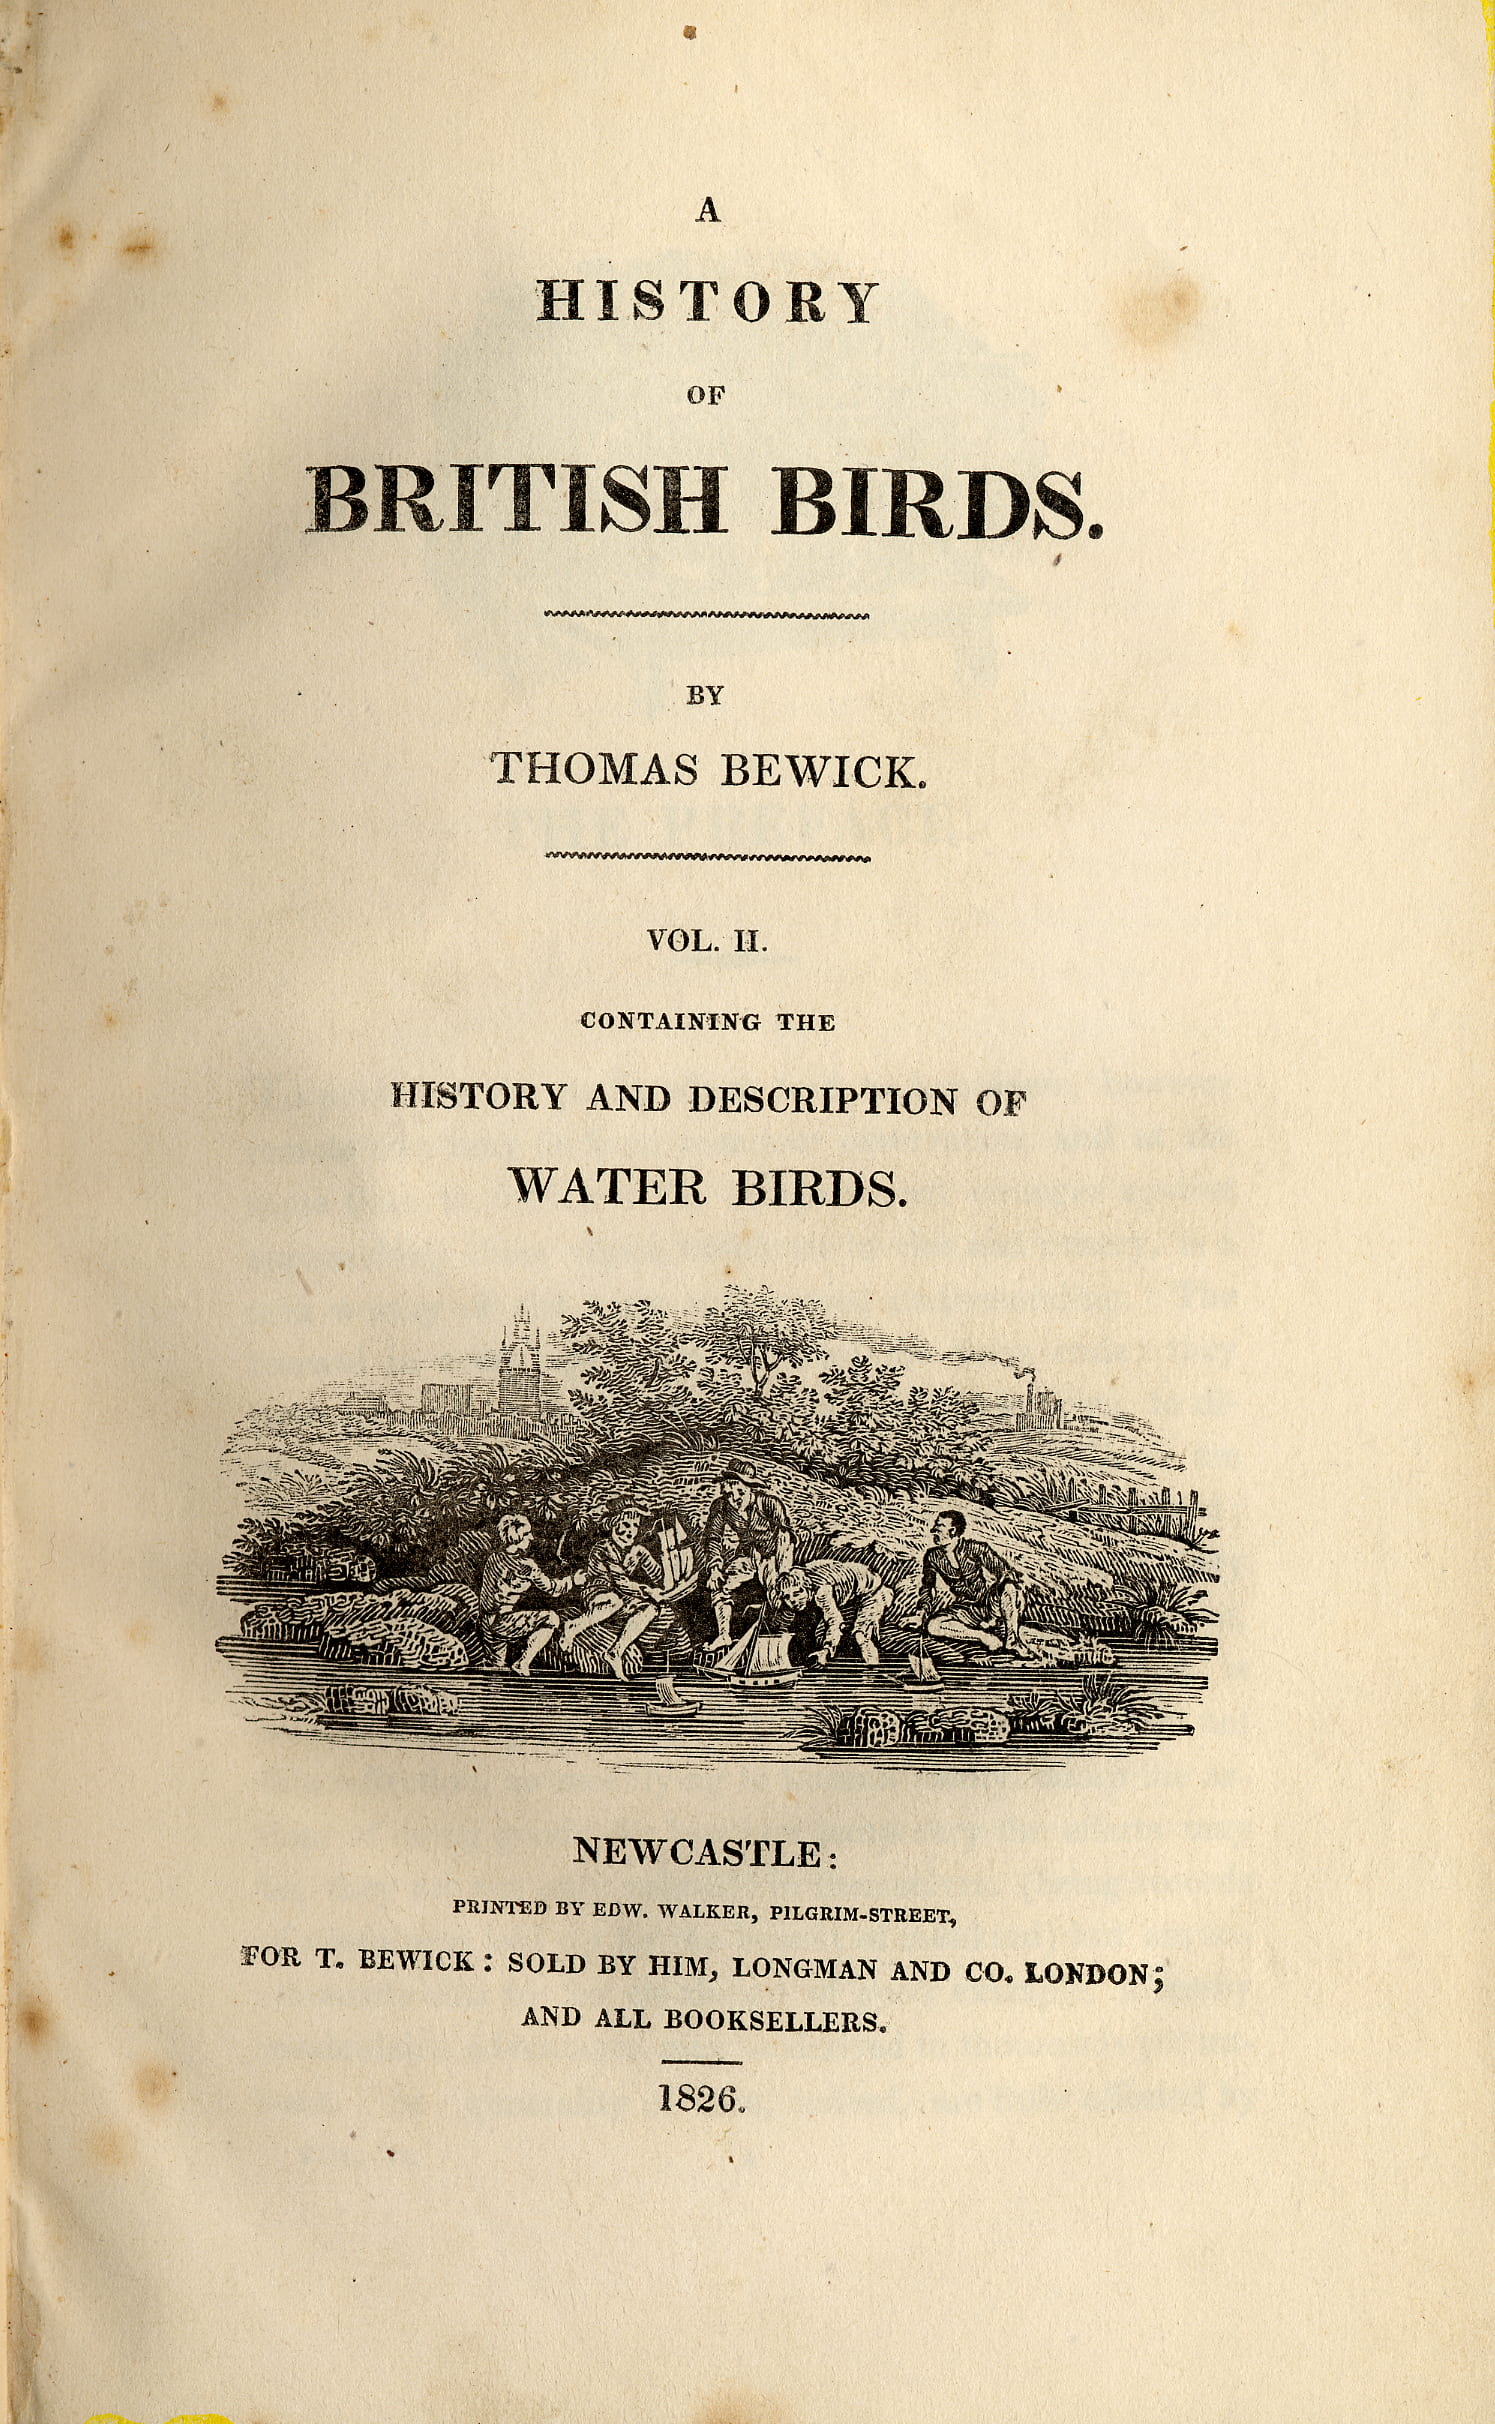 History of British Birds vol. 2 title page